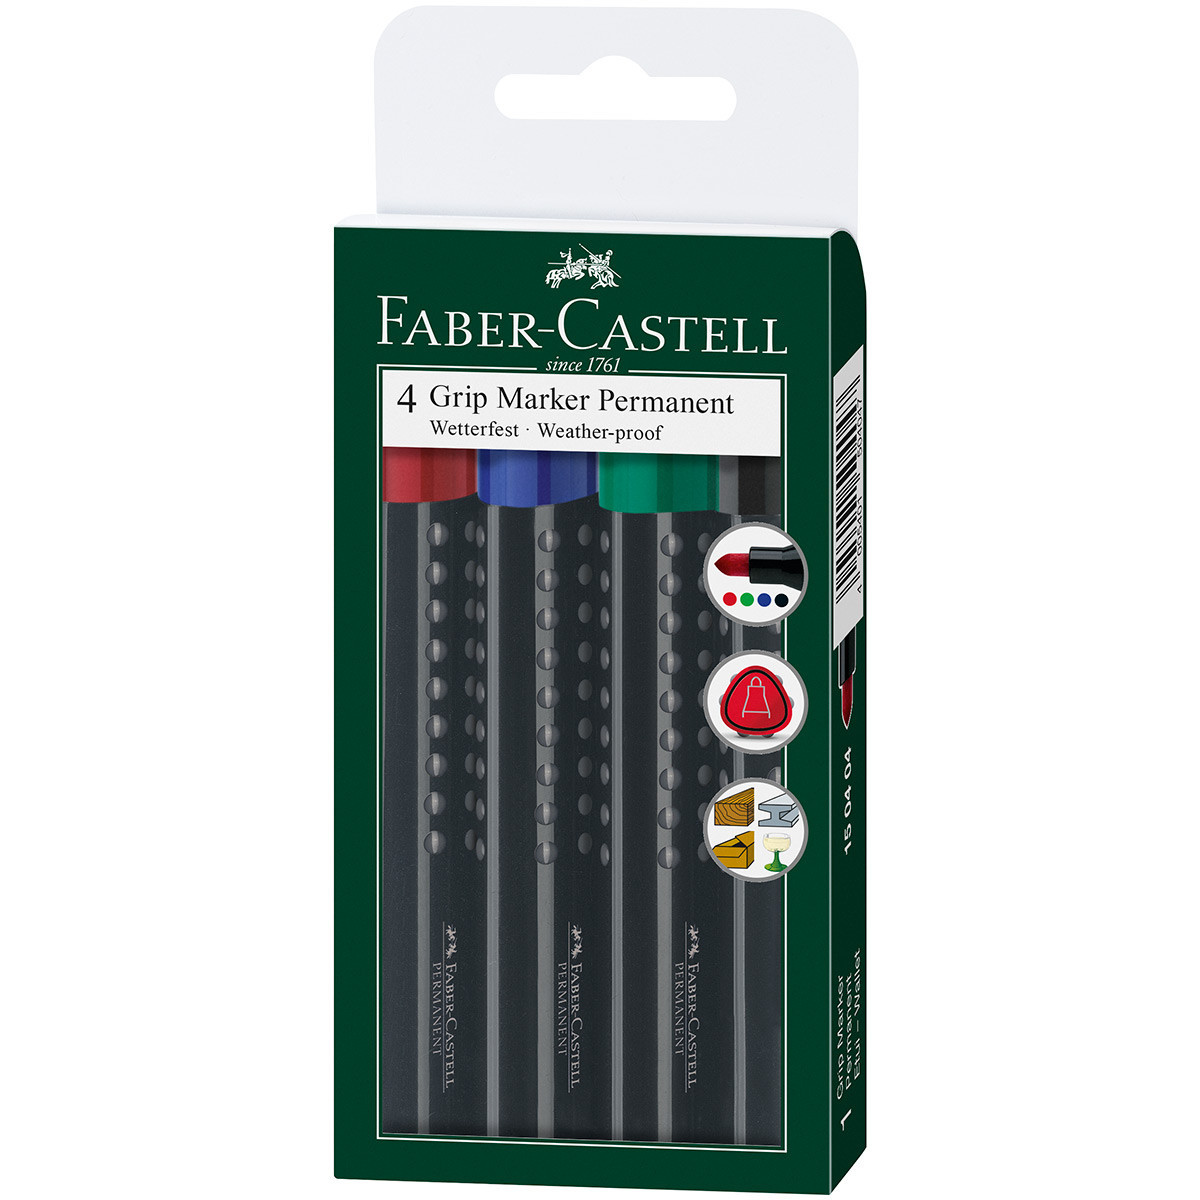 Faber-Castell Permanent Grip Marker - Bullet Tip - Assorted Colours (Wallet of 4)